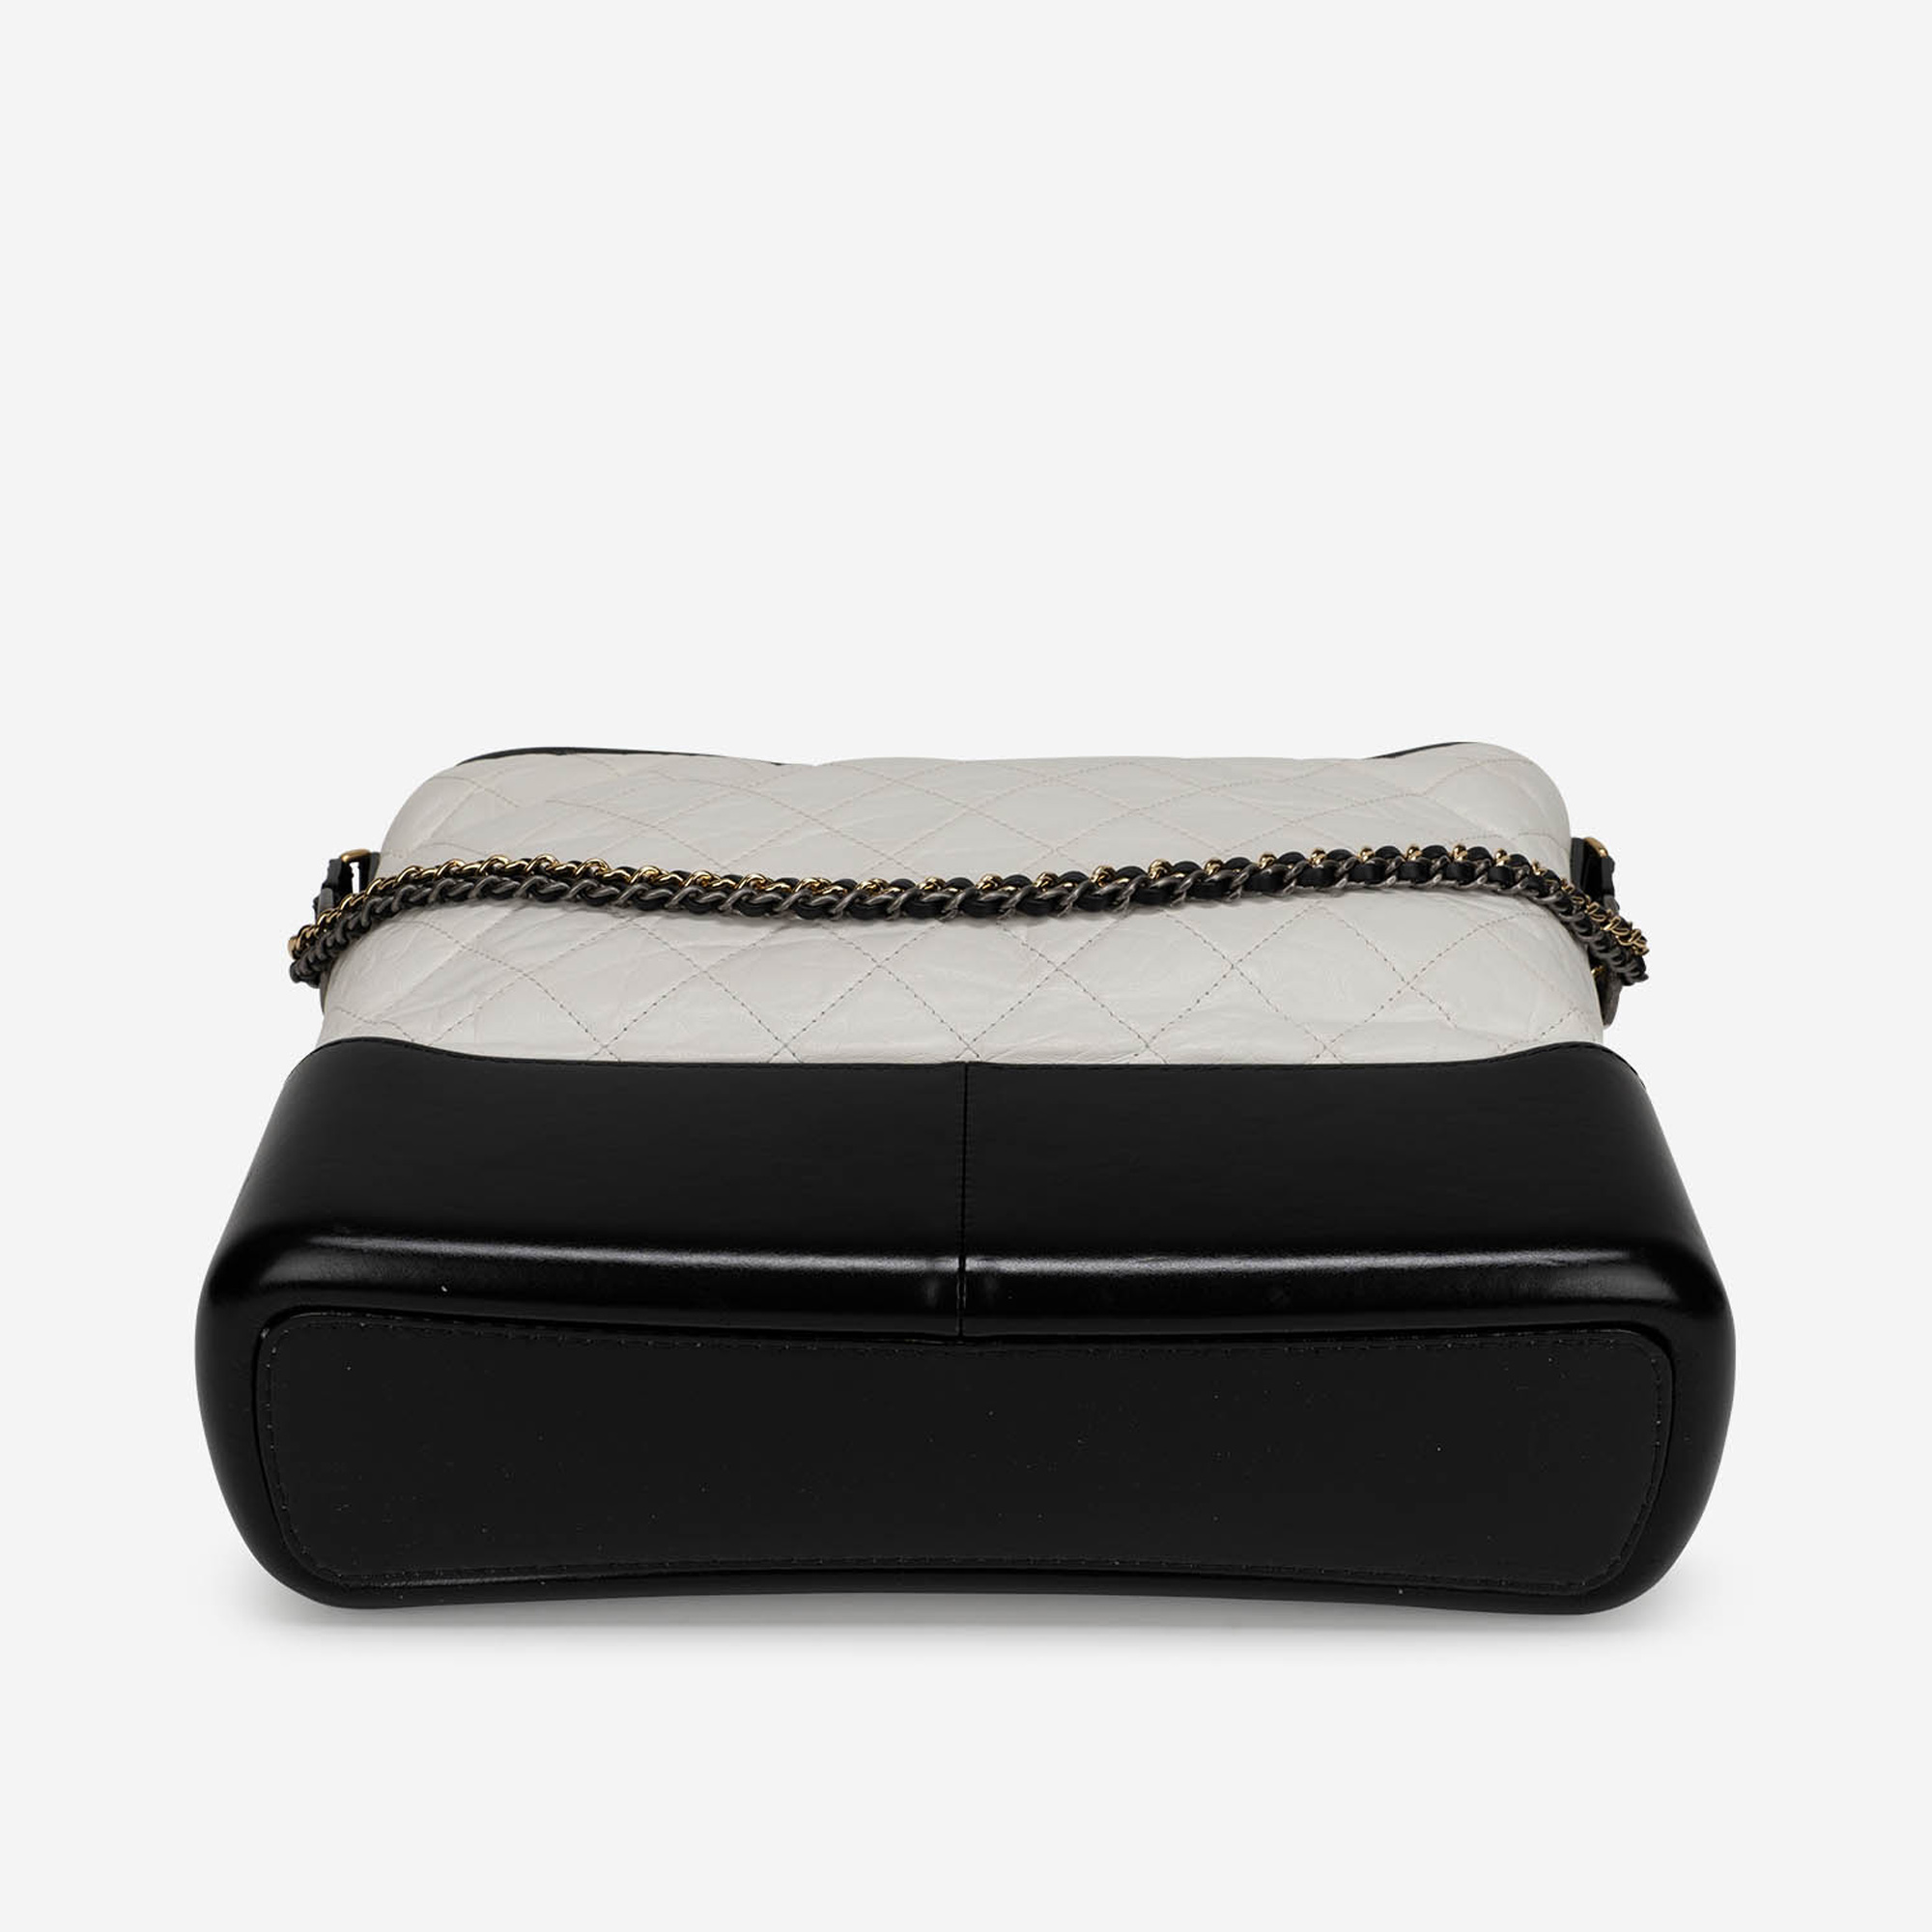 CHANEL Hobo Gabrielle bag in black and white leather - VALOIS